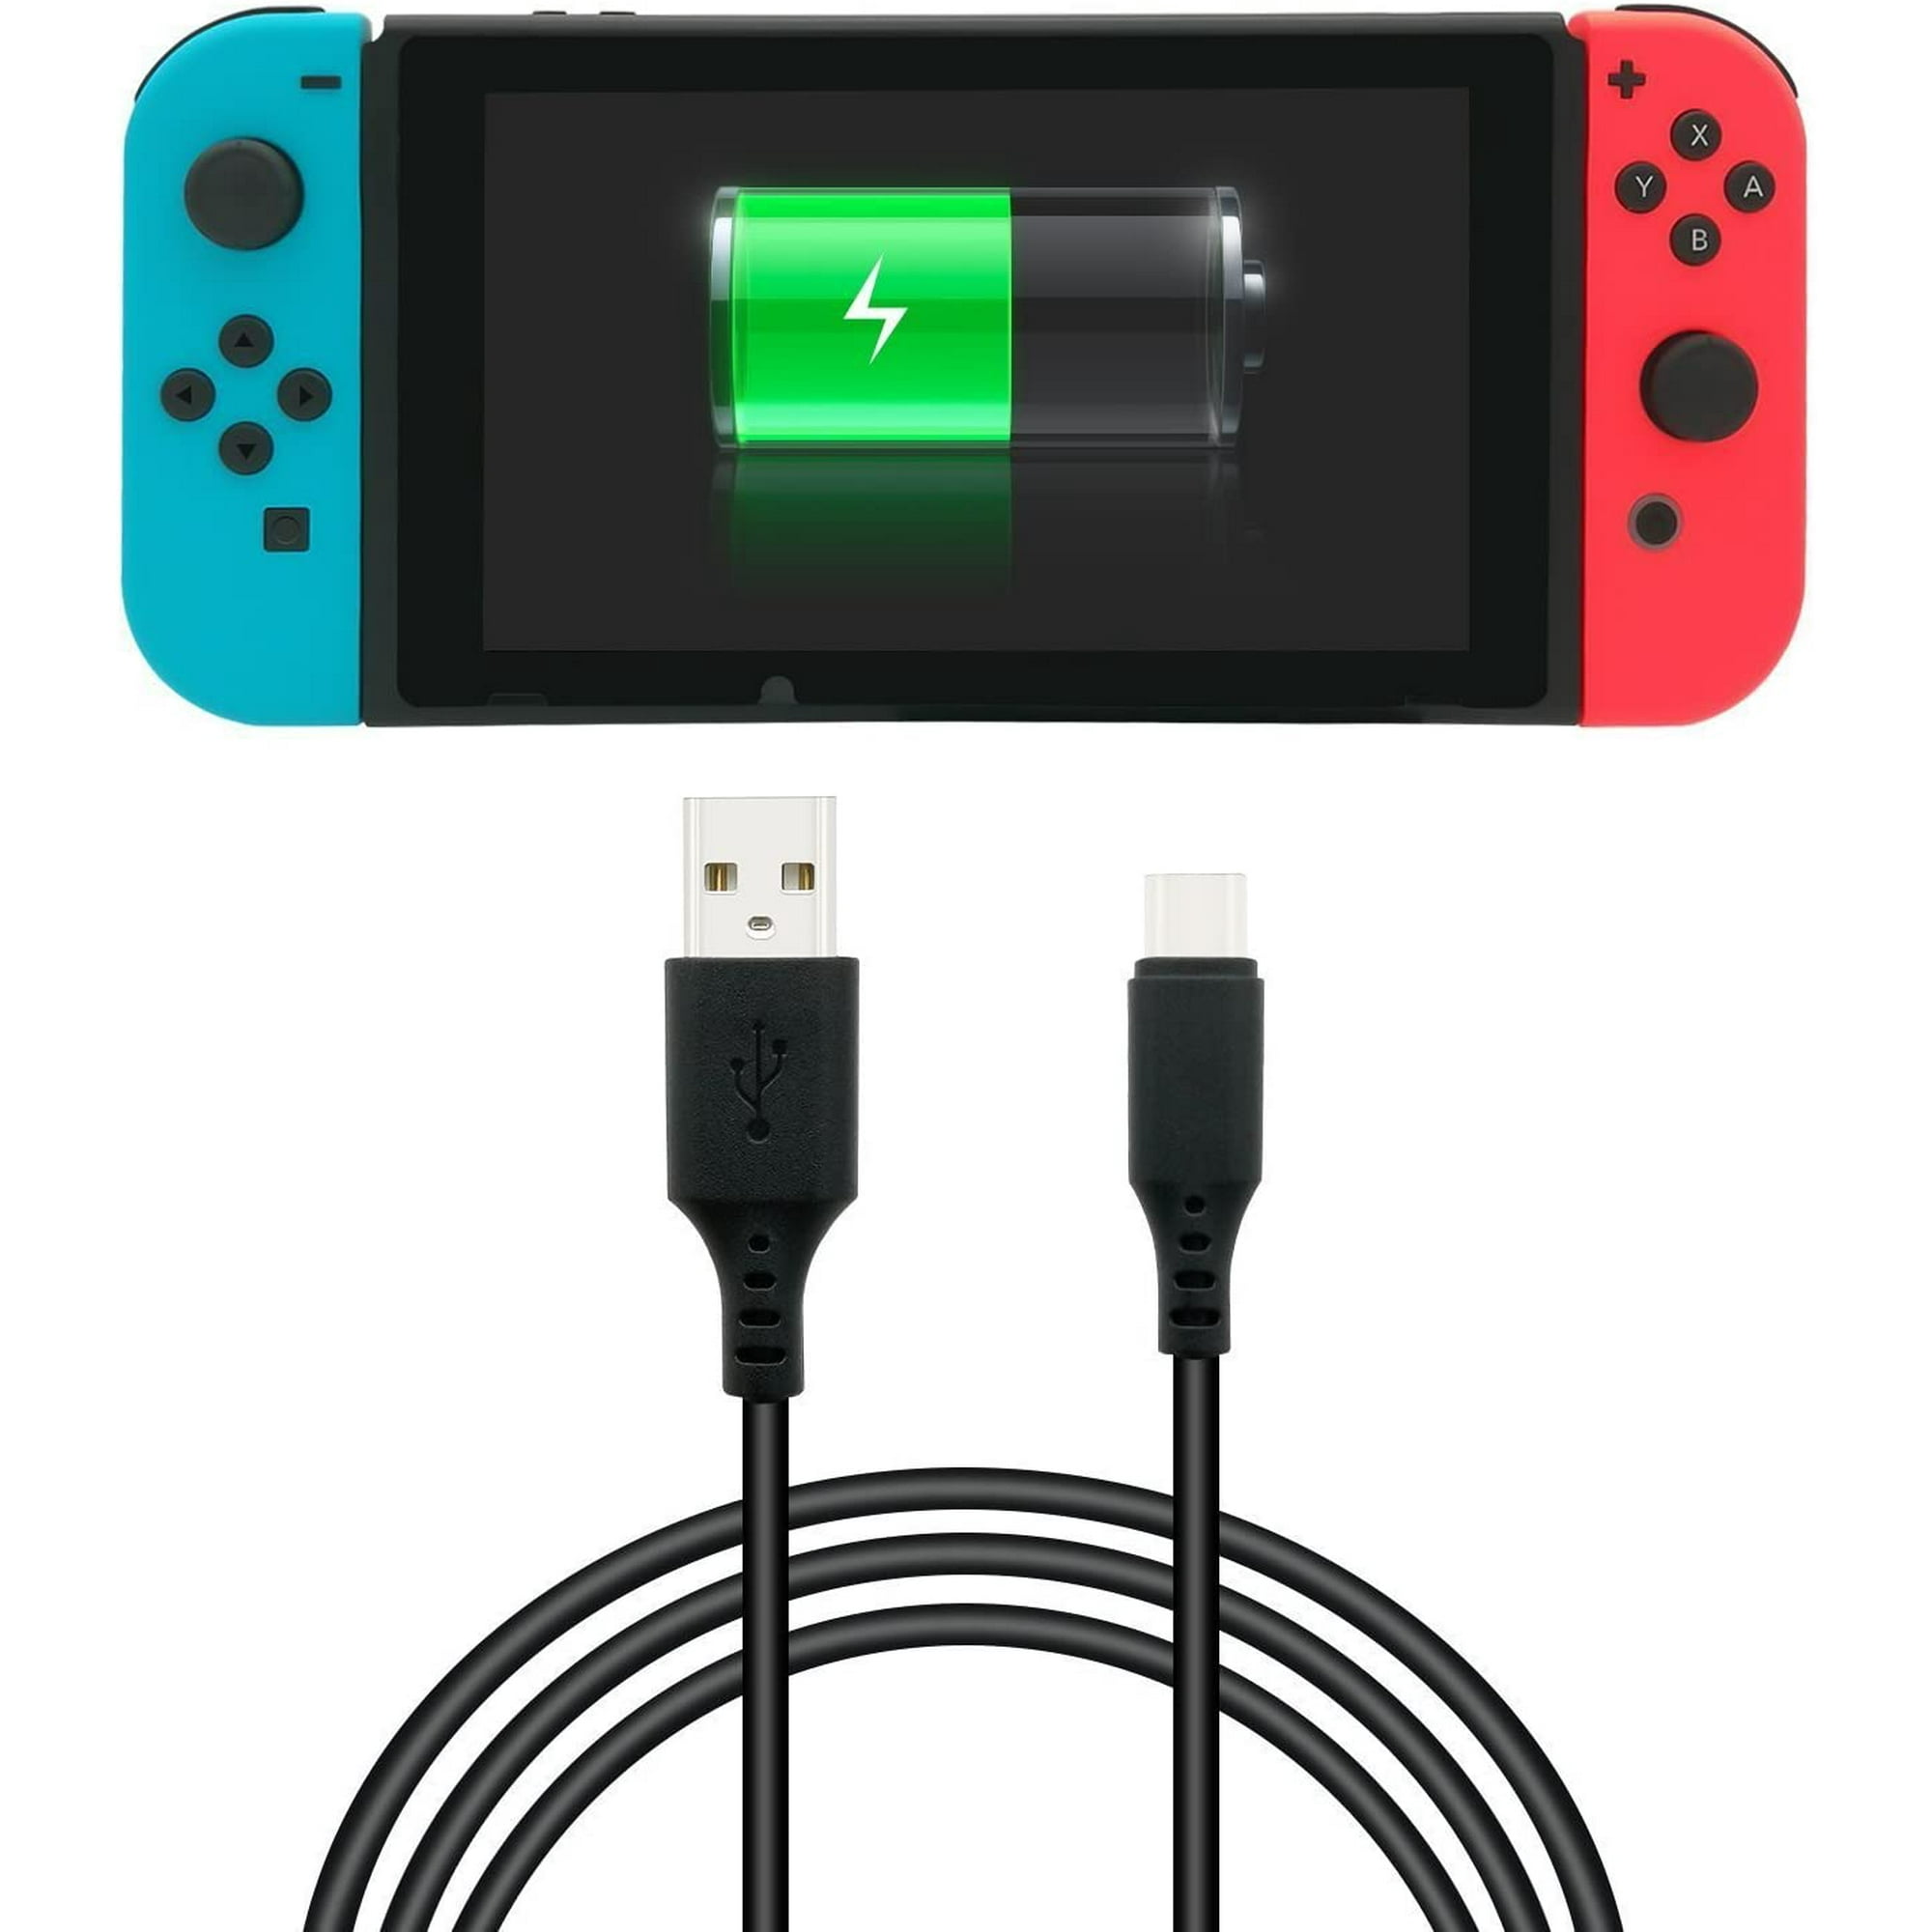 Charging Cable for Nintendo Switch and Switch Lite, FYOUNG Charger for Nintendo  Switch Samsung Galaxy S9 S8 Note 8 | Walmart Canada